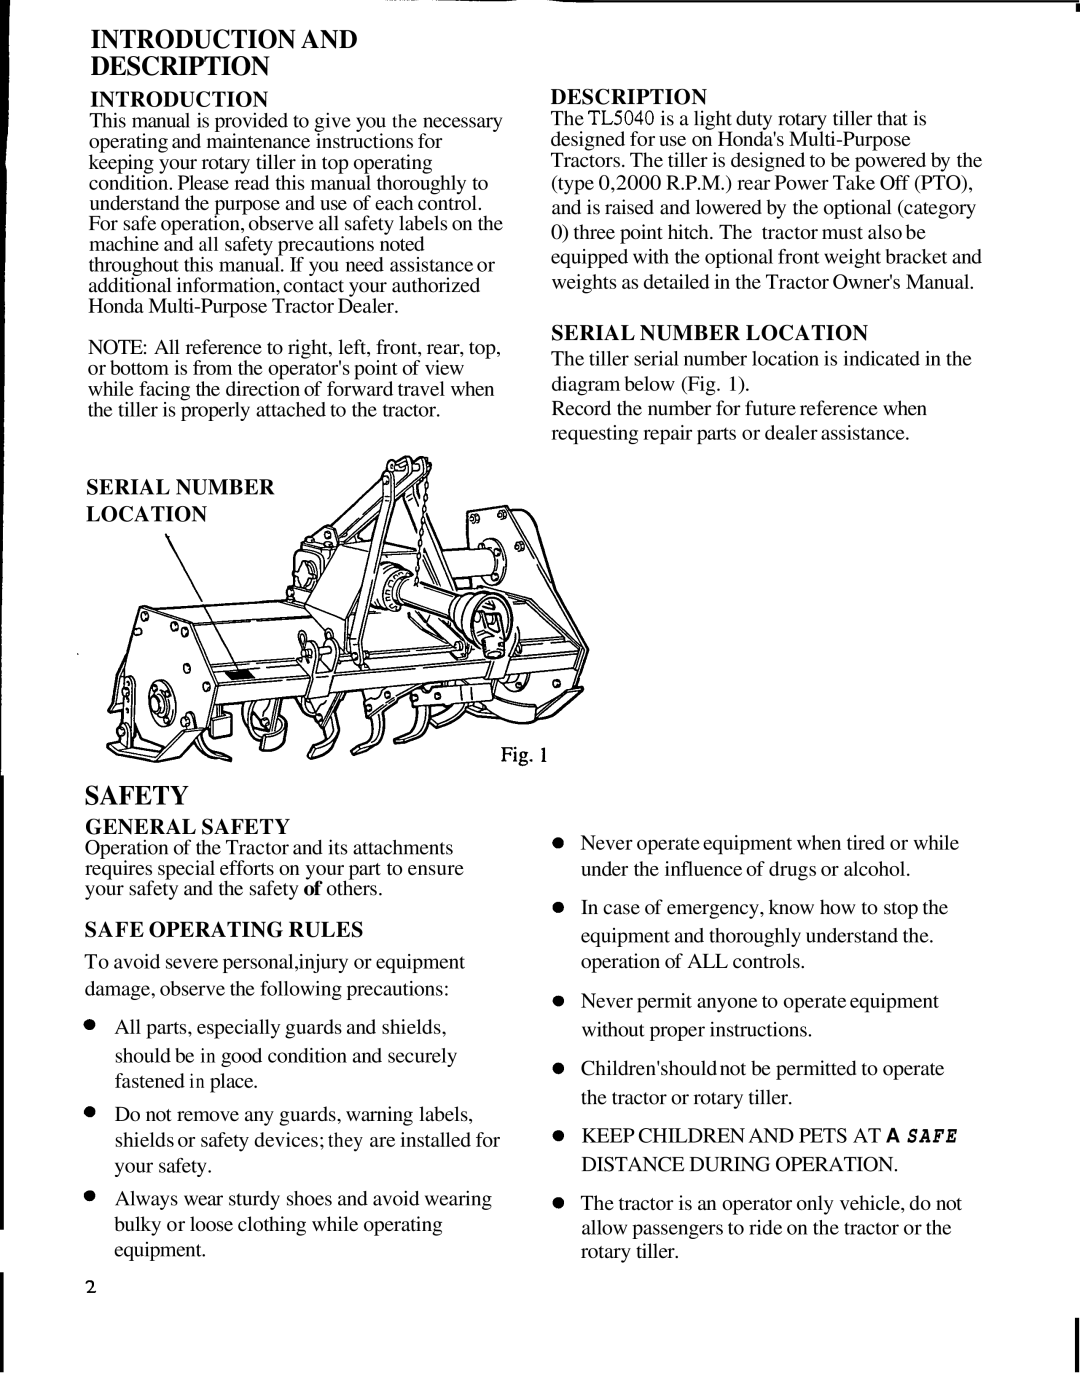 Honda Power Equipment TL5040 manual Introduction And Description, Serial Number Location, General Safety 